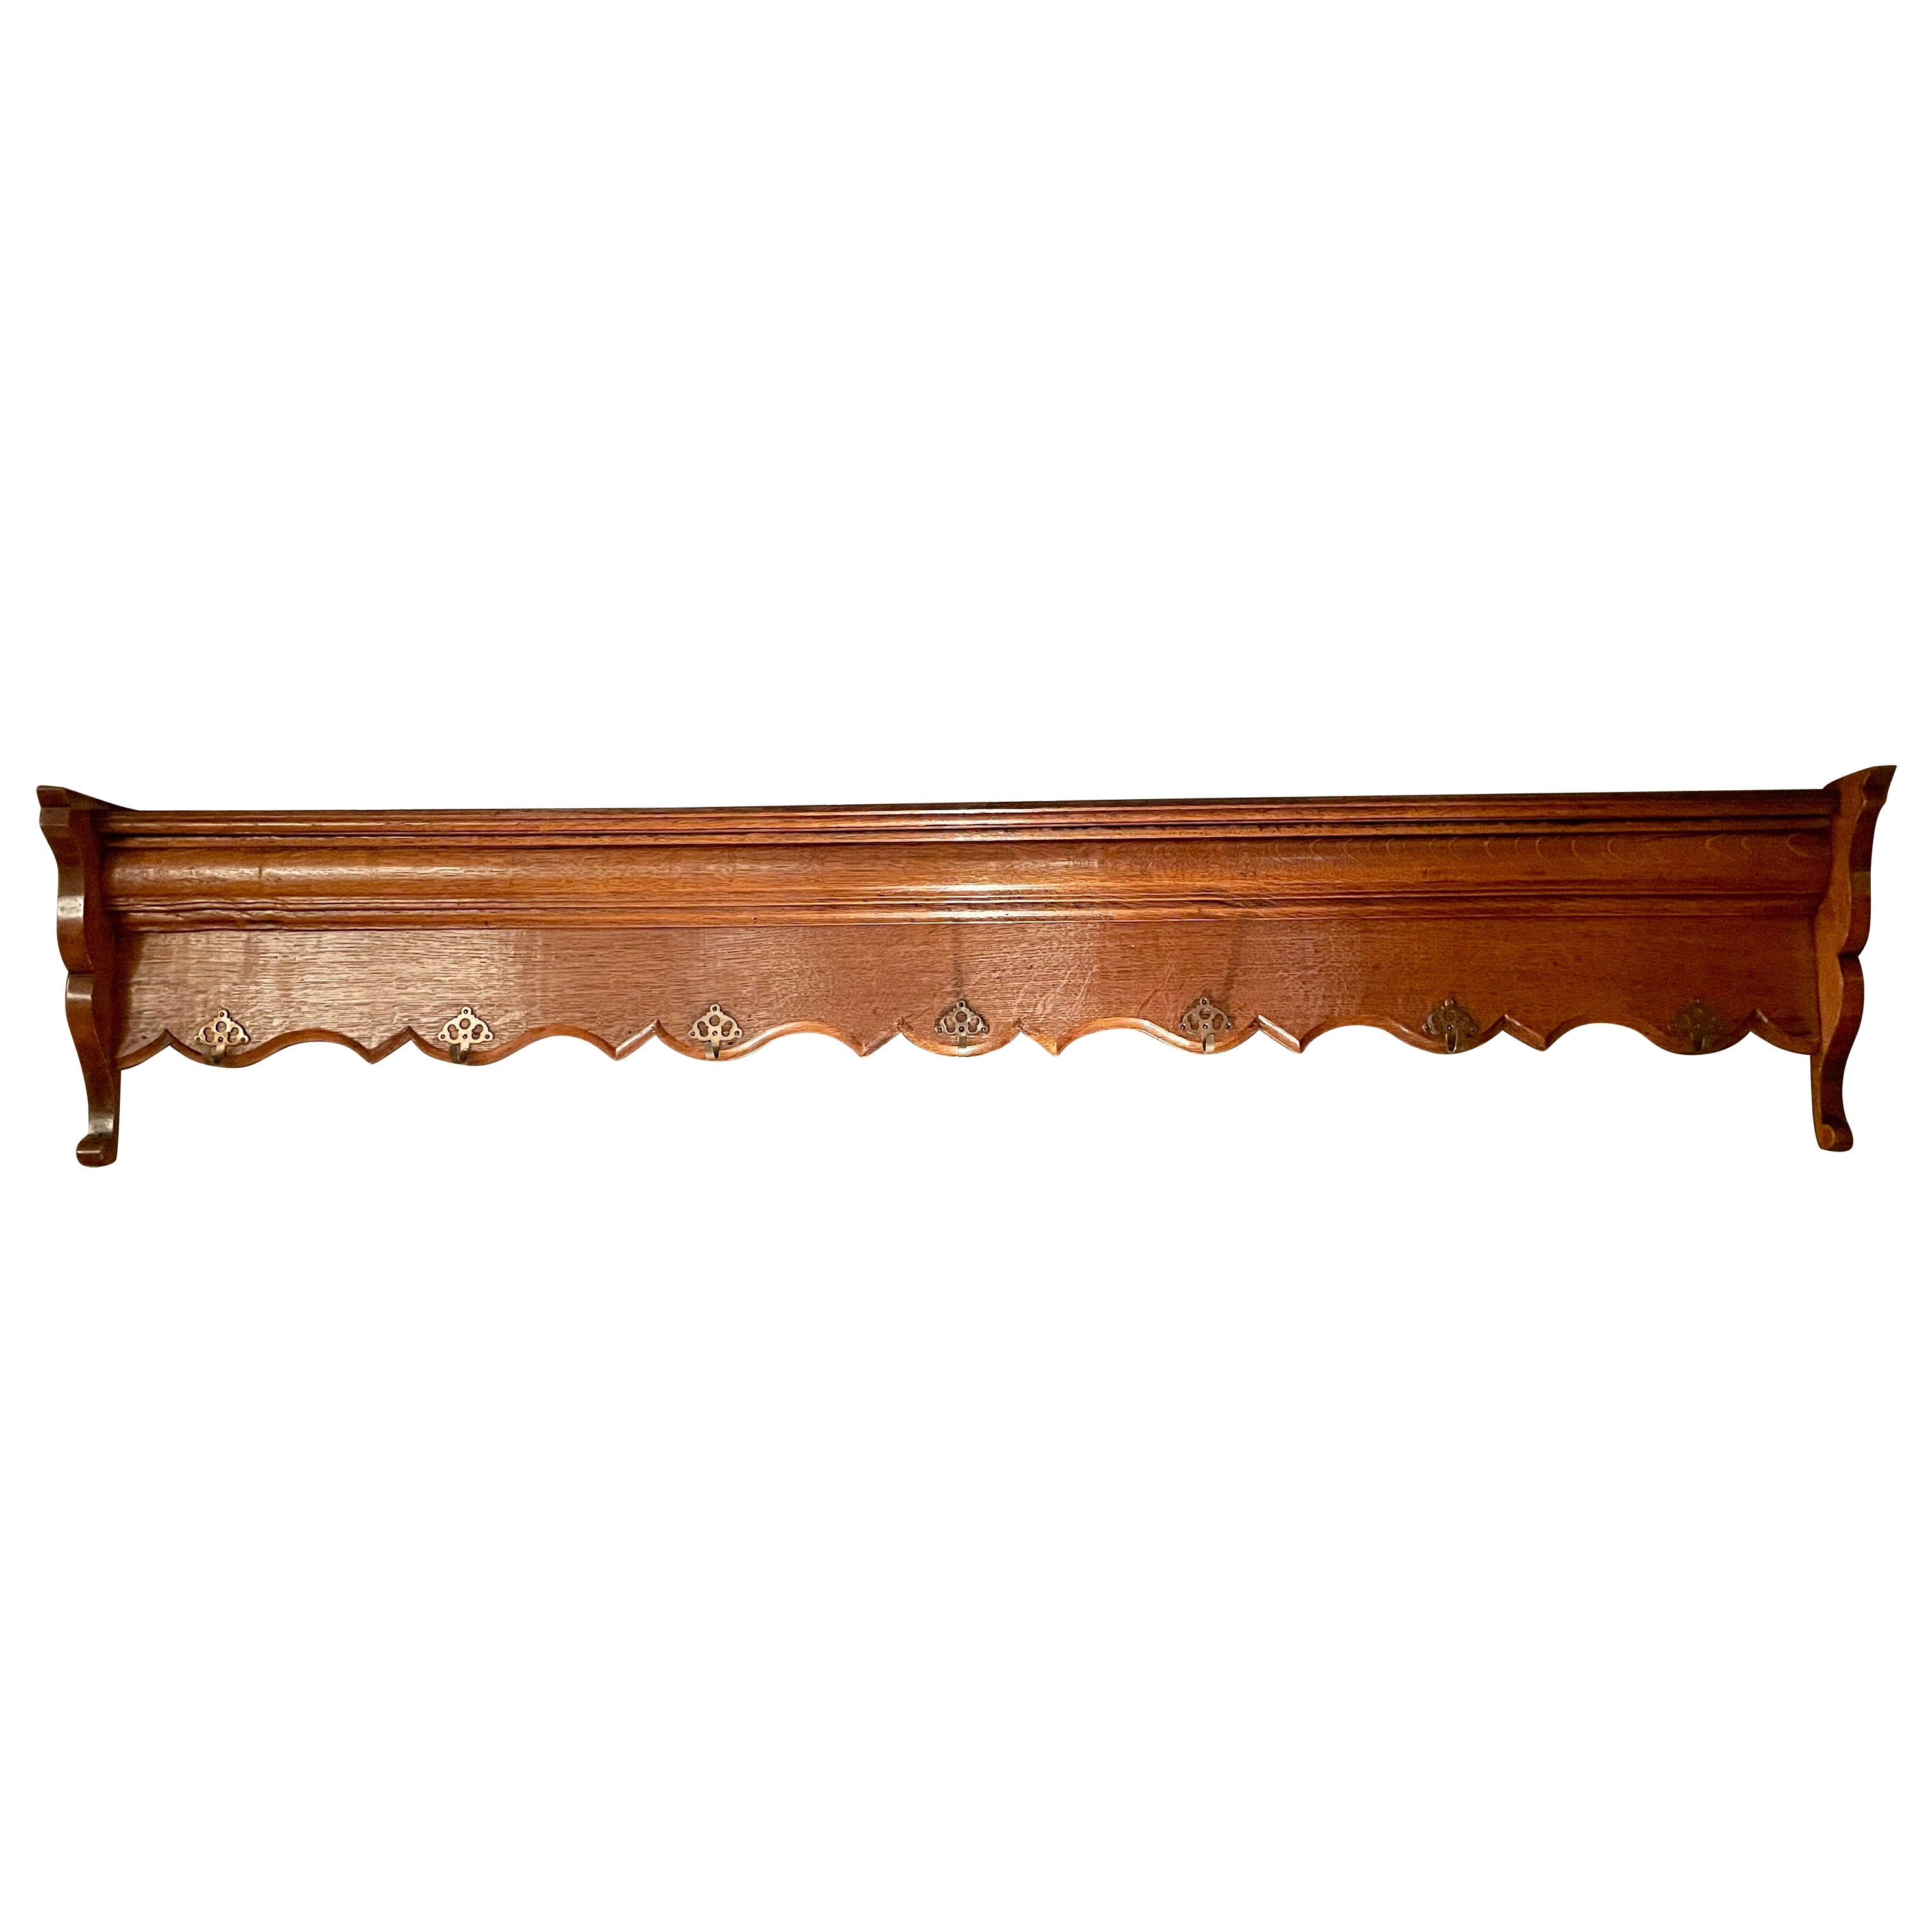 Antique French Provincial Carved Fruitwood Hanging Rack, Circa 1890-1900. For Sale